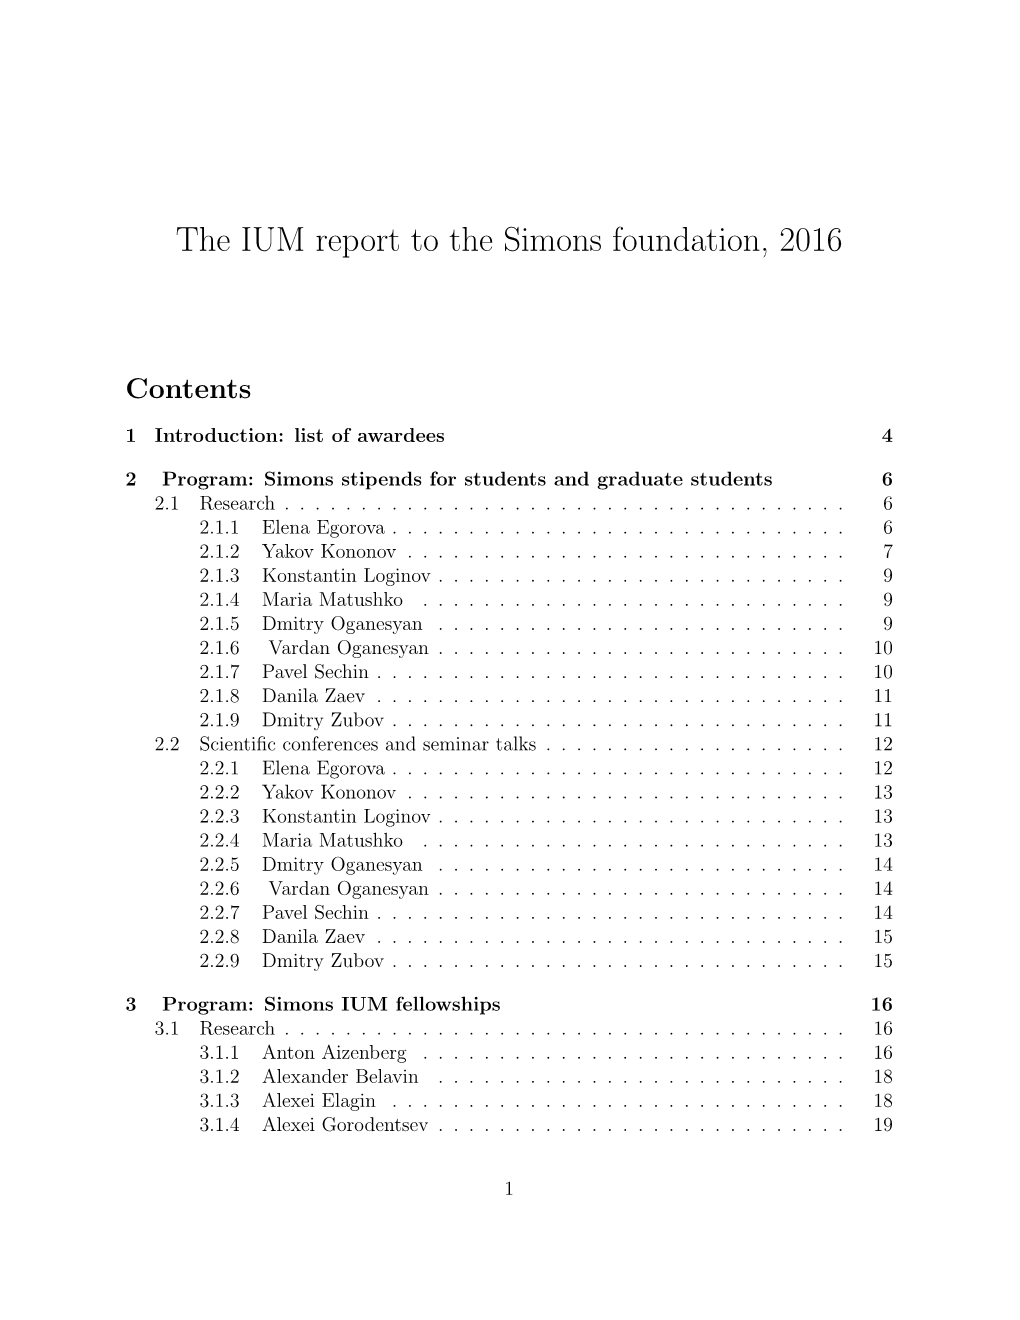 The IUM Report to the Simons Foundation, 2016